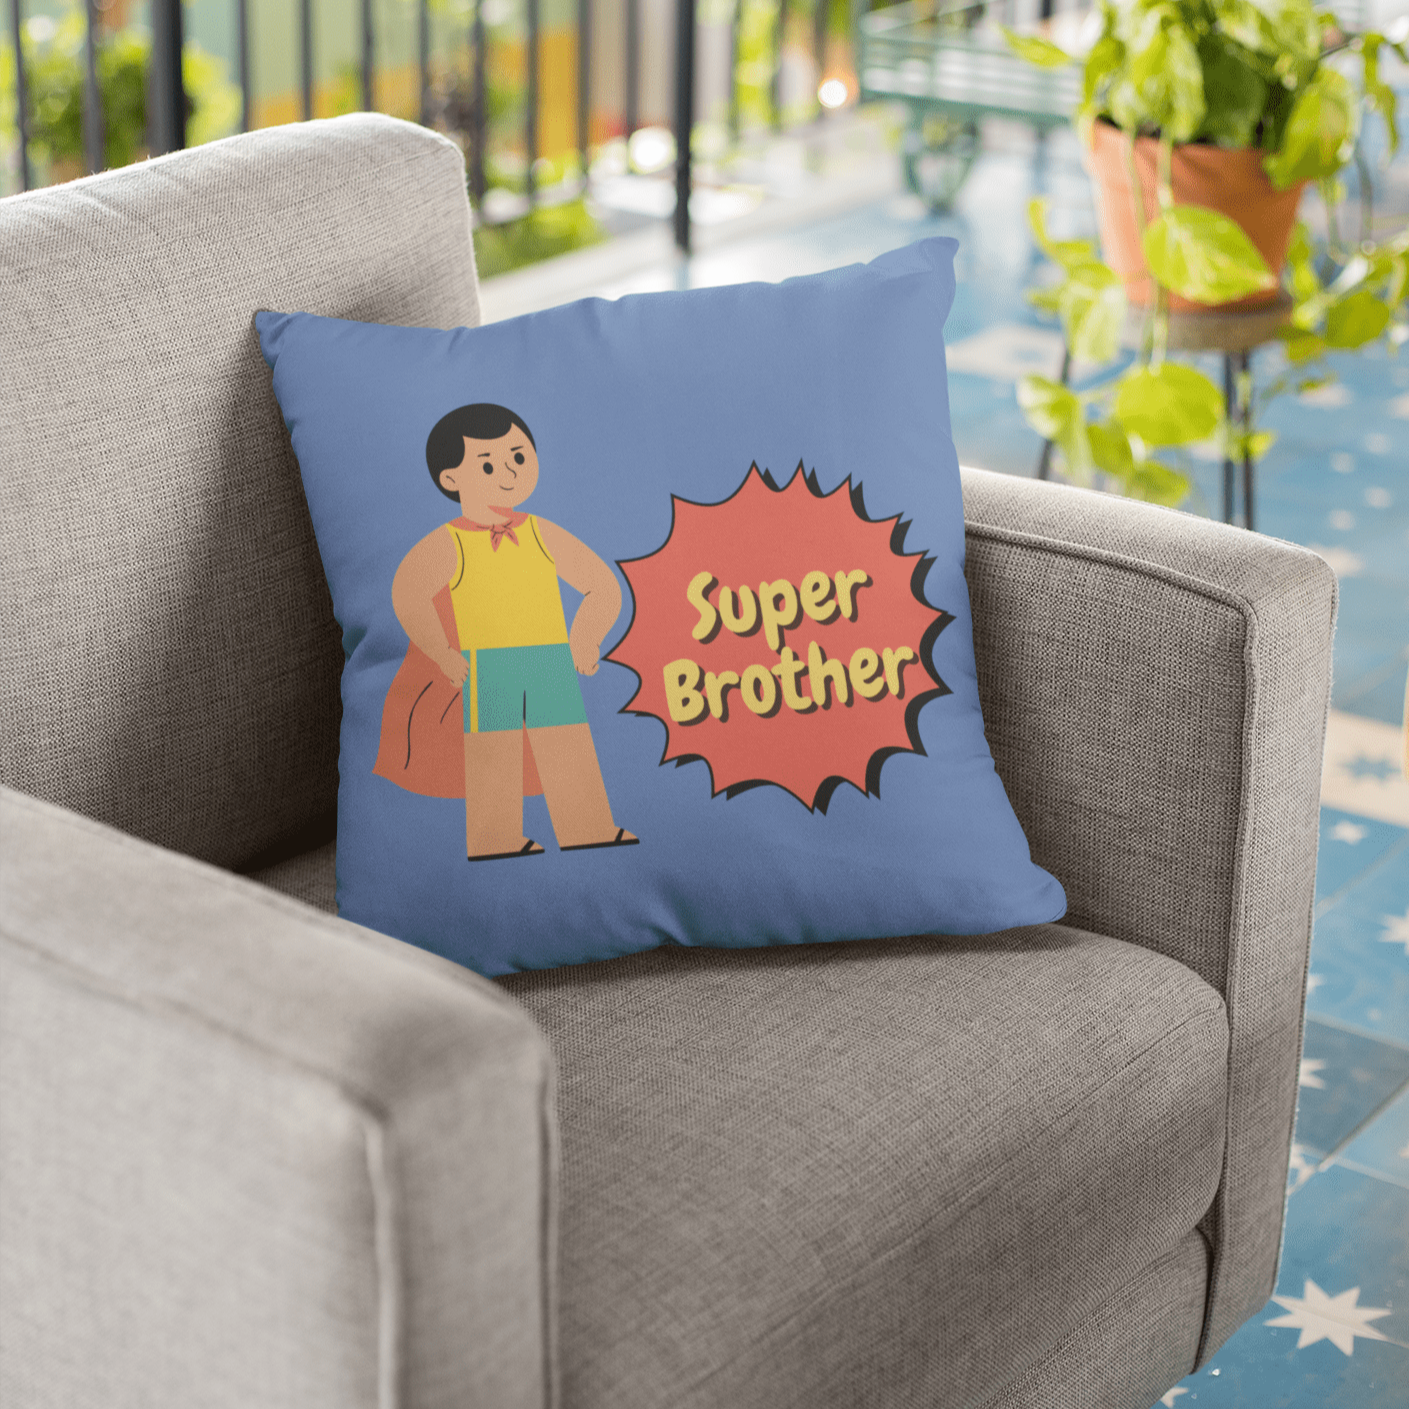 Super Brother Pillow